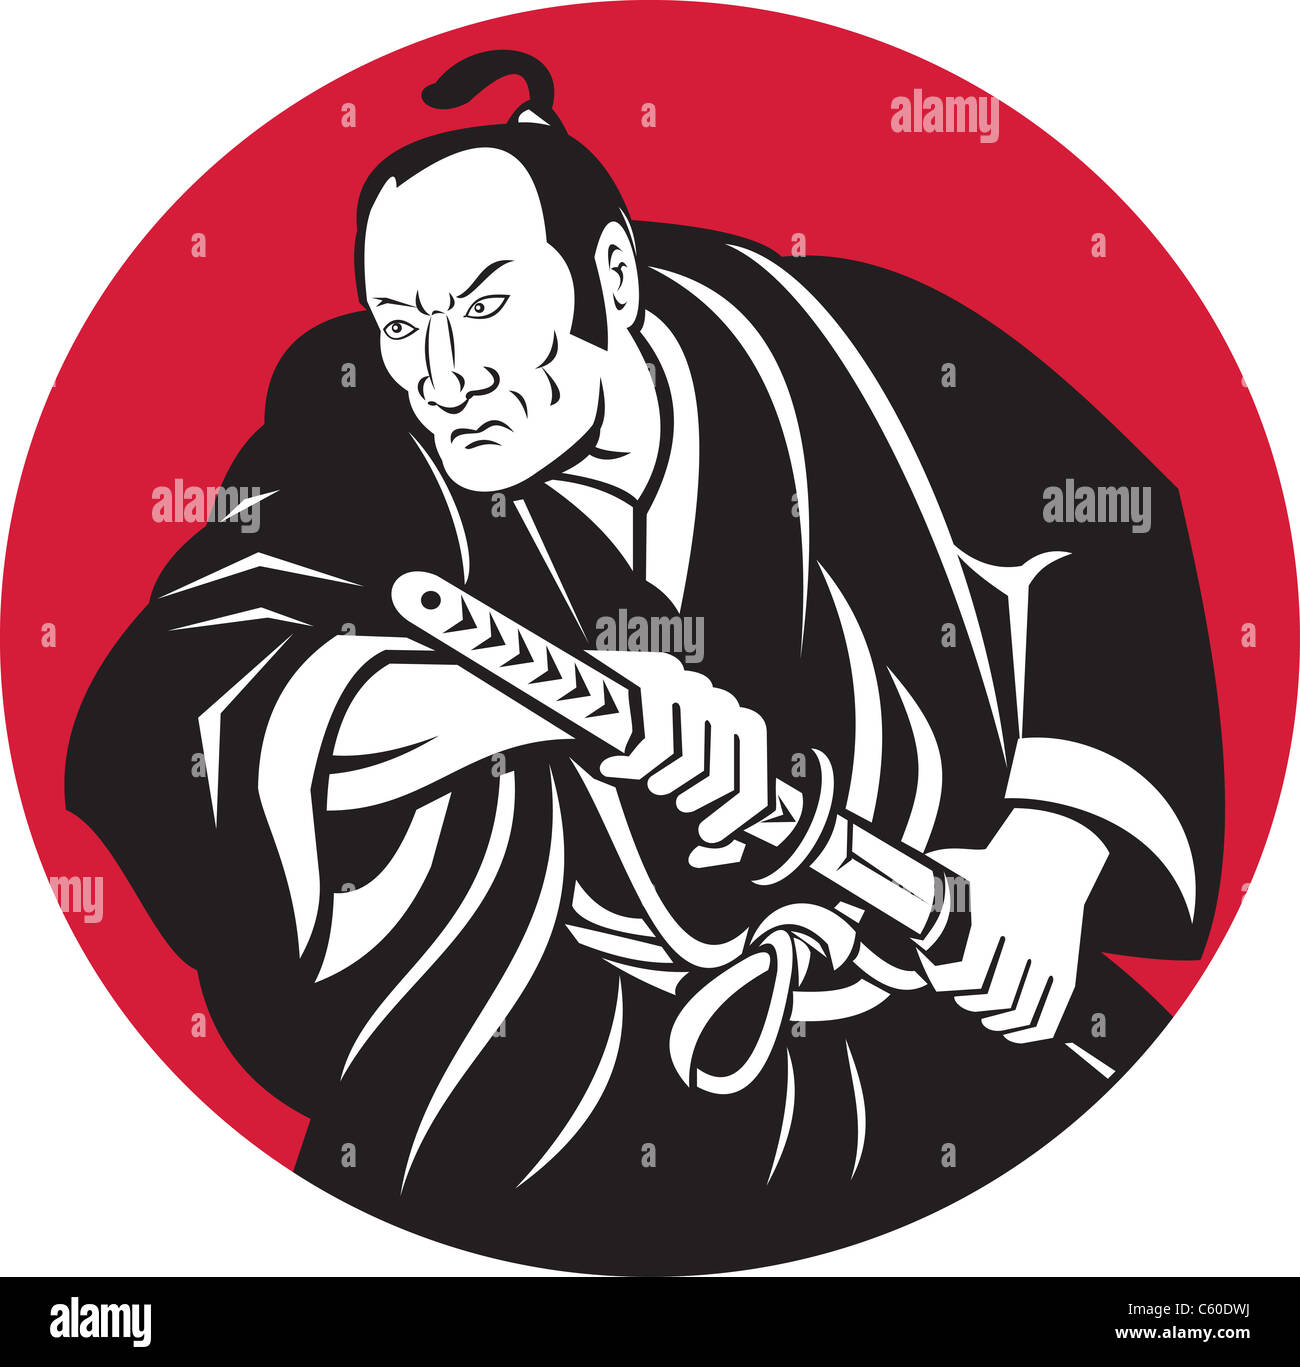 illustration of a Japanese Samurai warrior about to draw sword set inside circle done in retro style Stock Photo